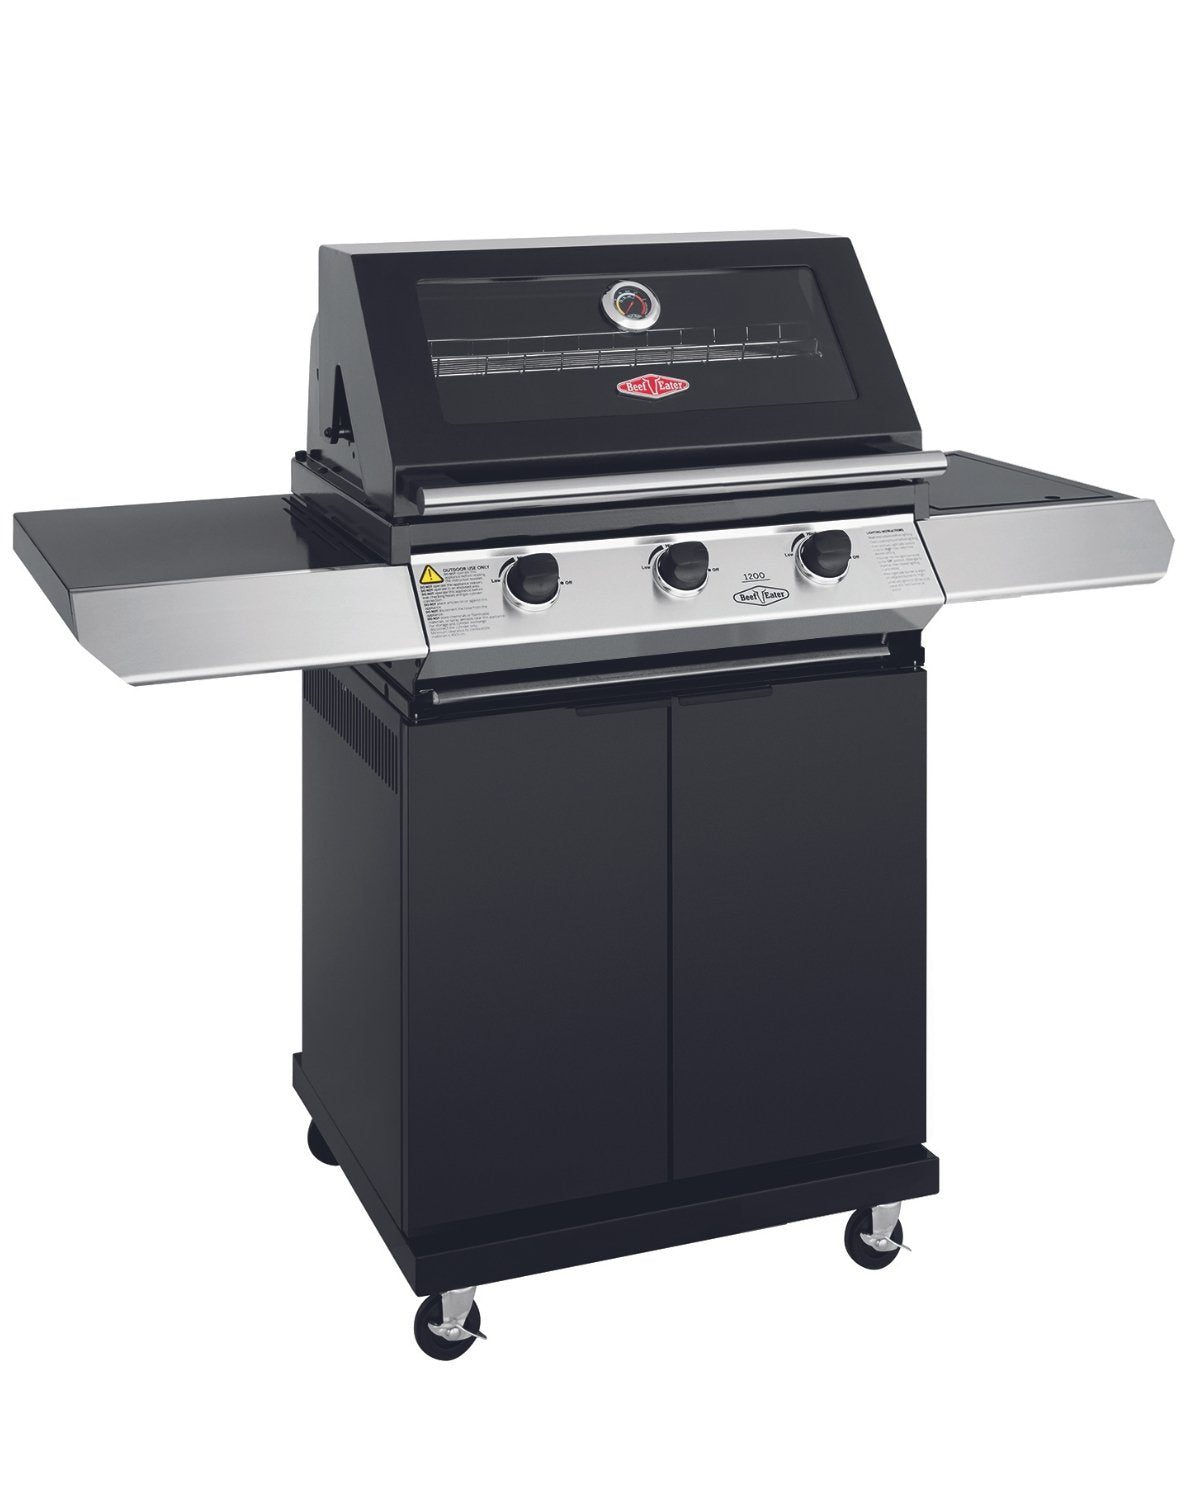 Beefeater 1200S Series - 3 Burner BBQ & Side Burner Trolley - The Outdoor Kitchen Company Ltd